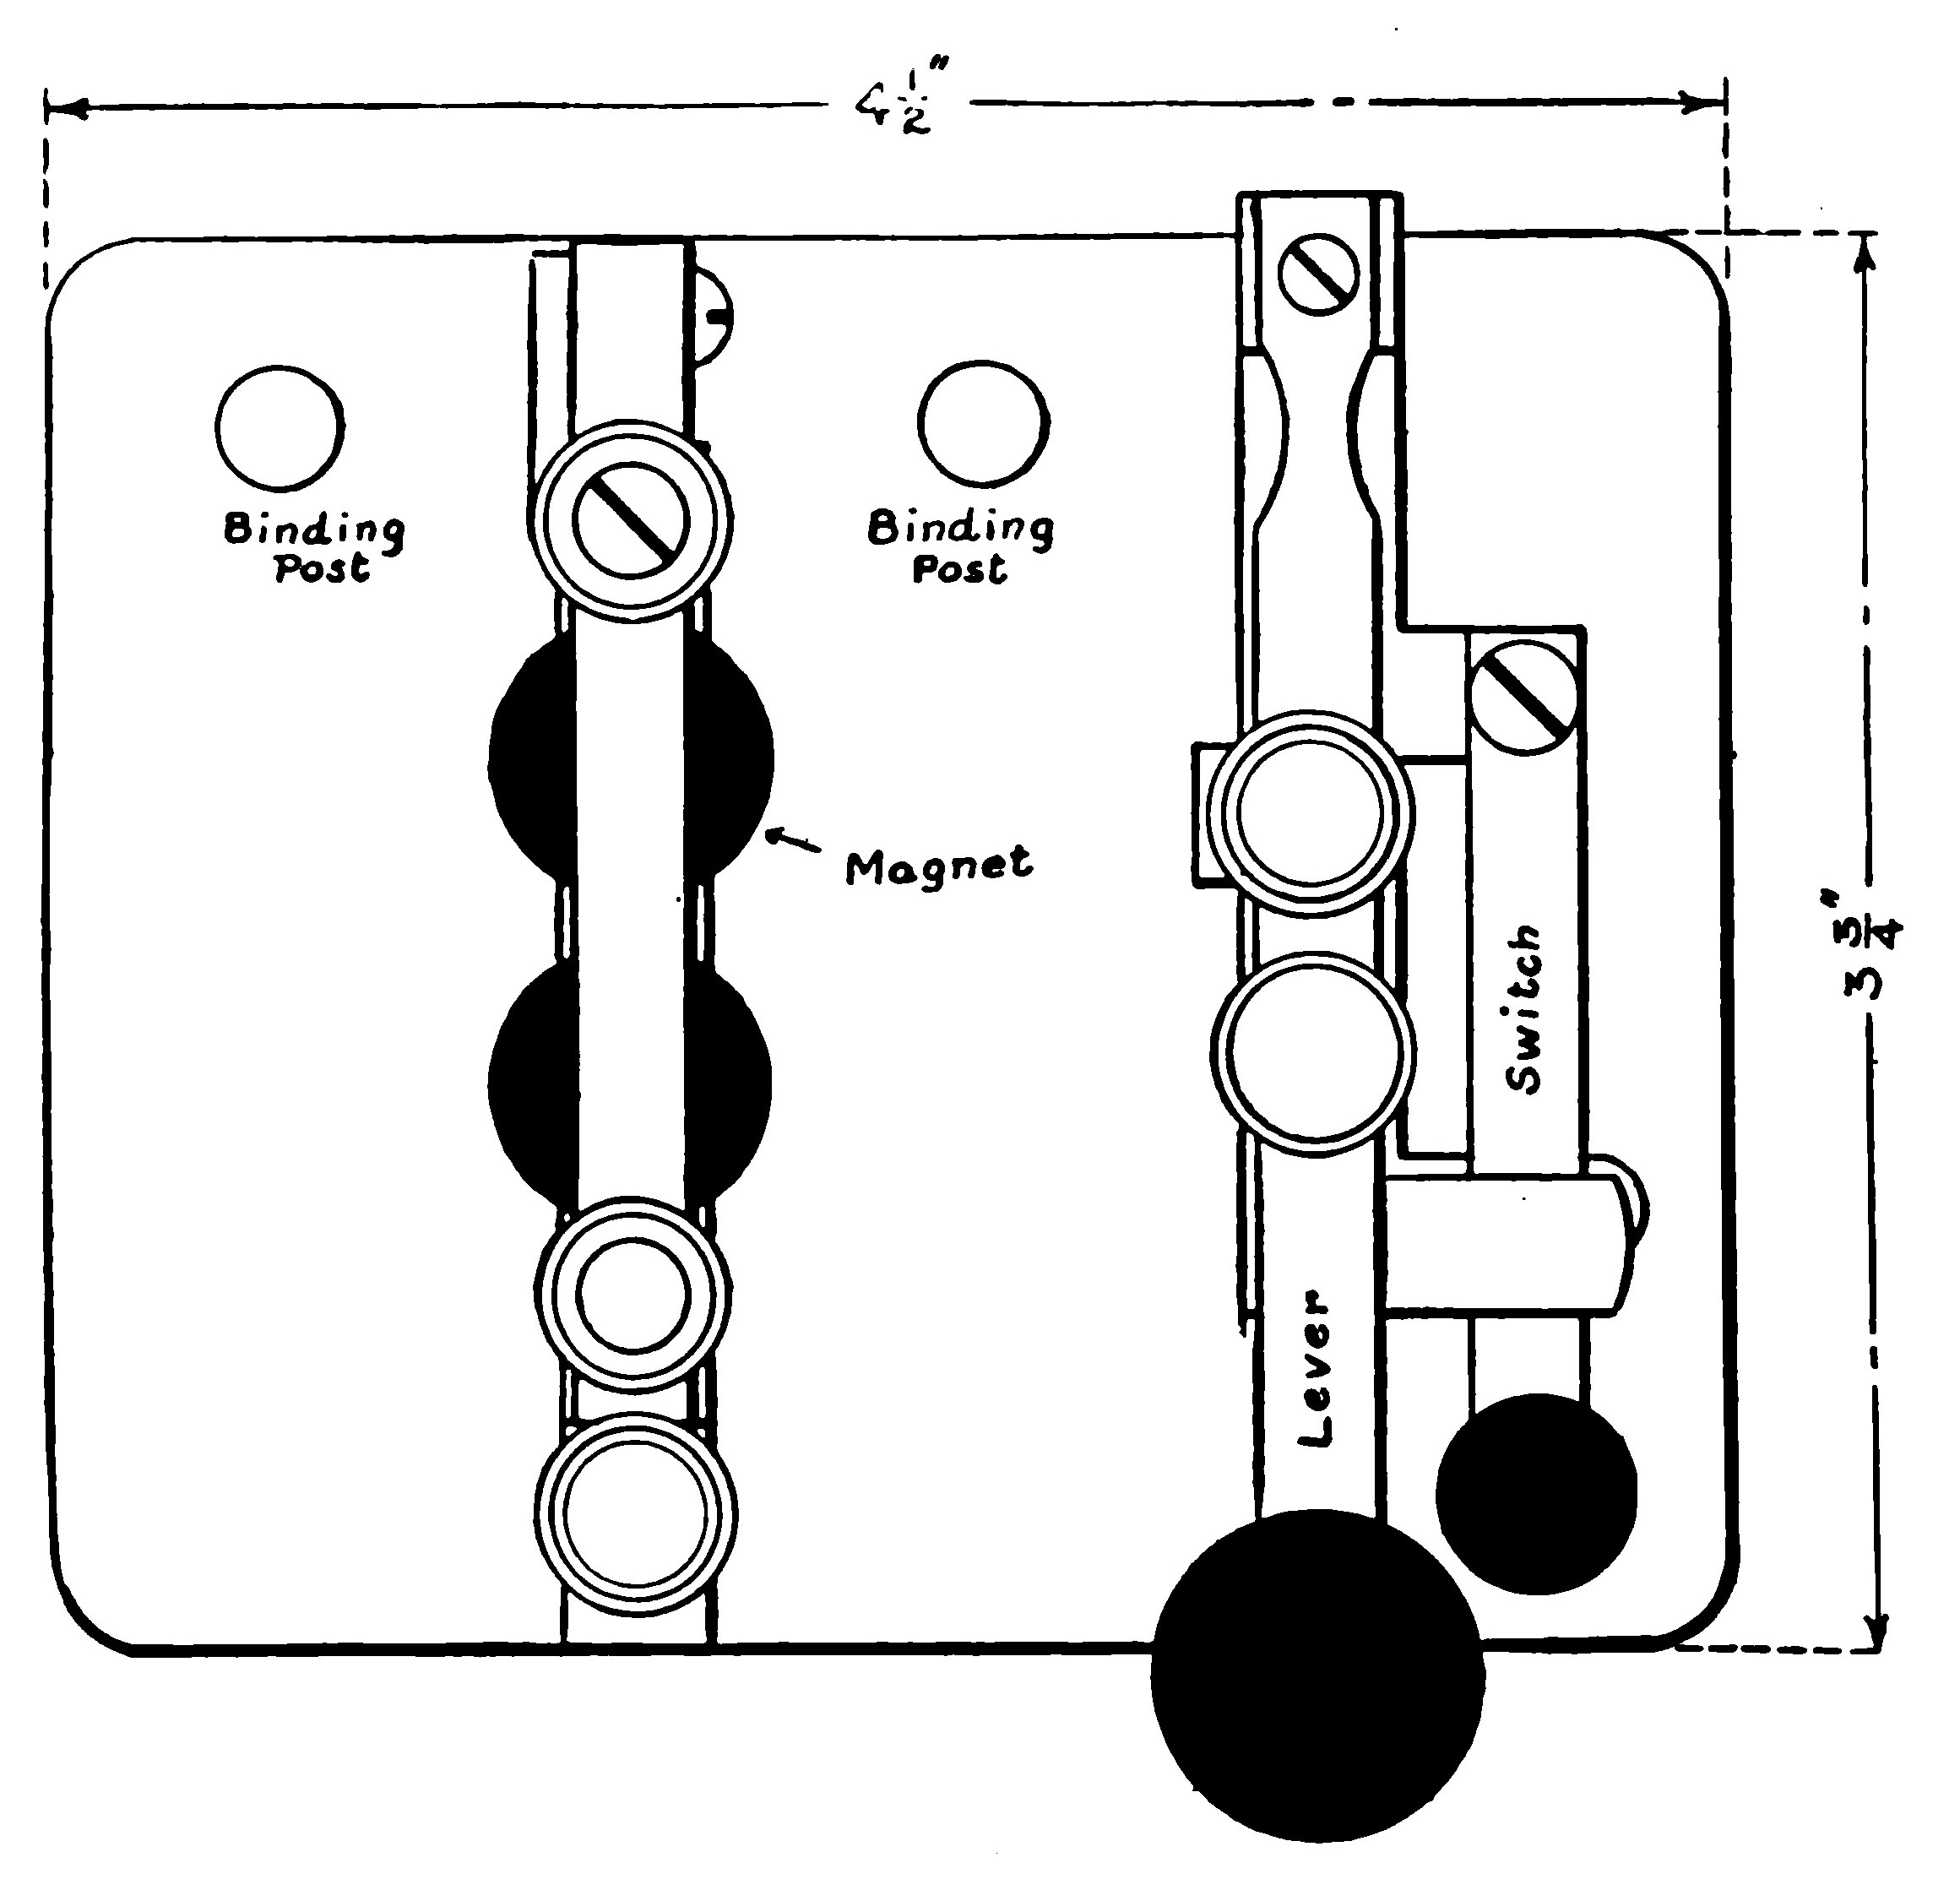 FIG. 88.—Top View of Completed Instrument